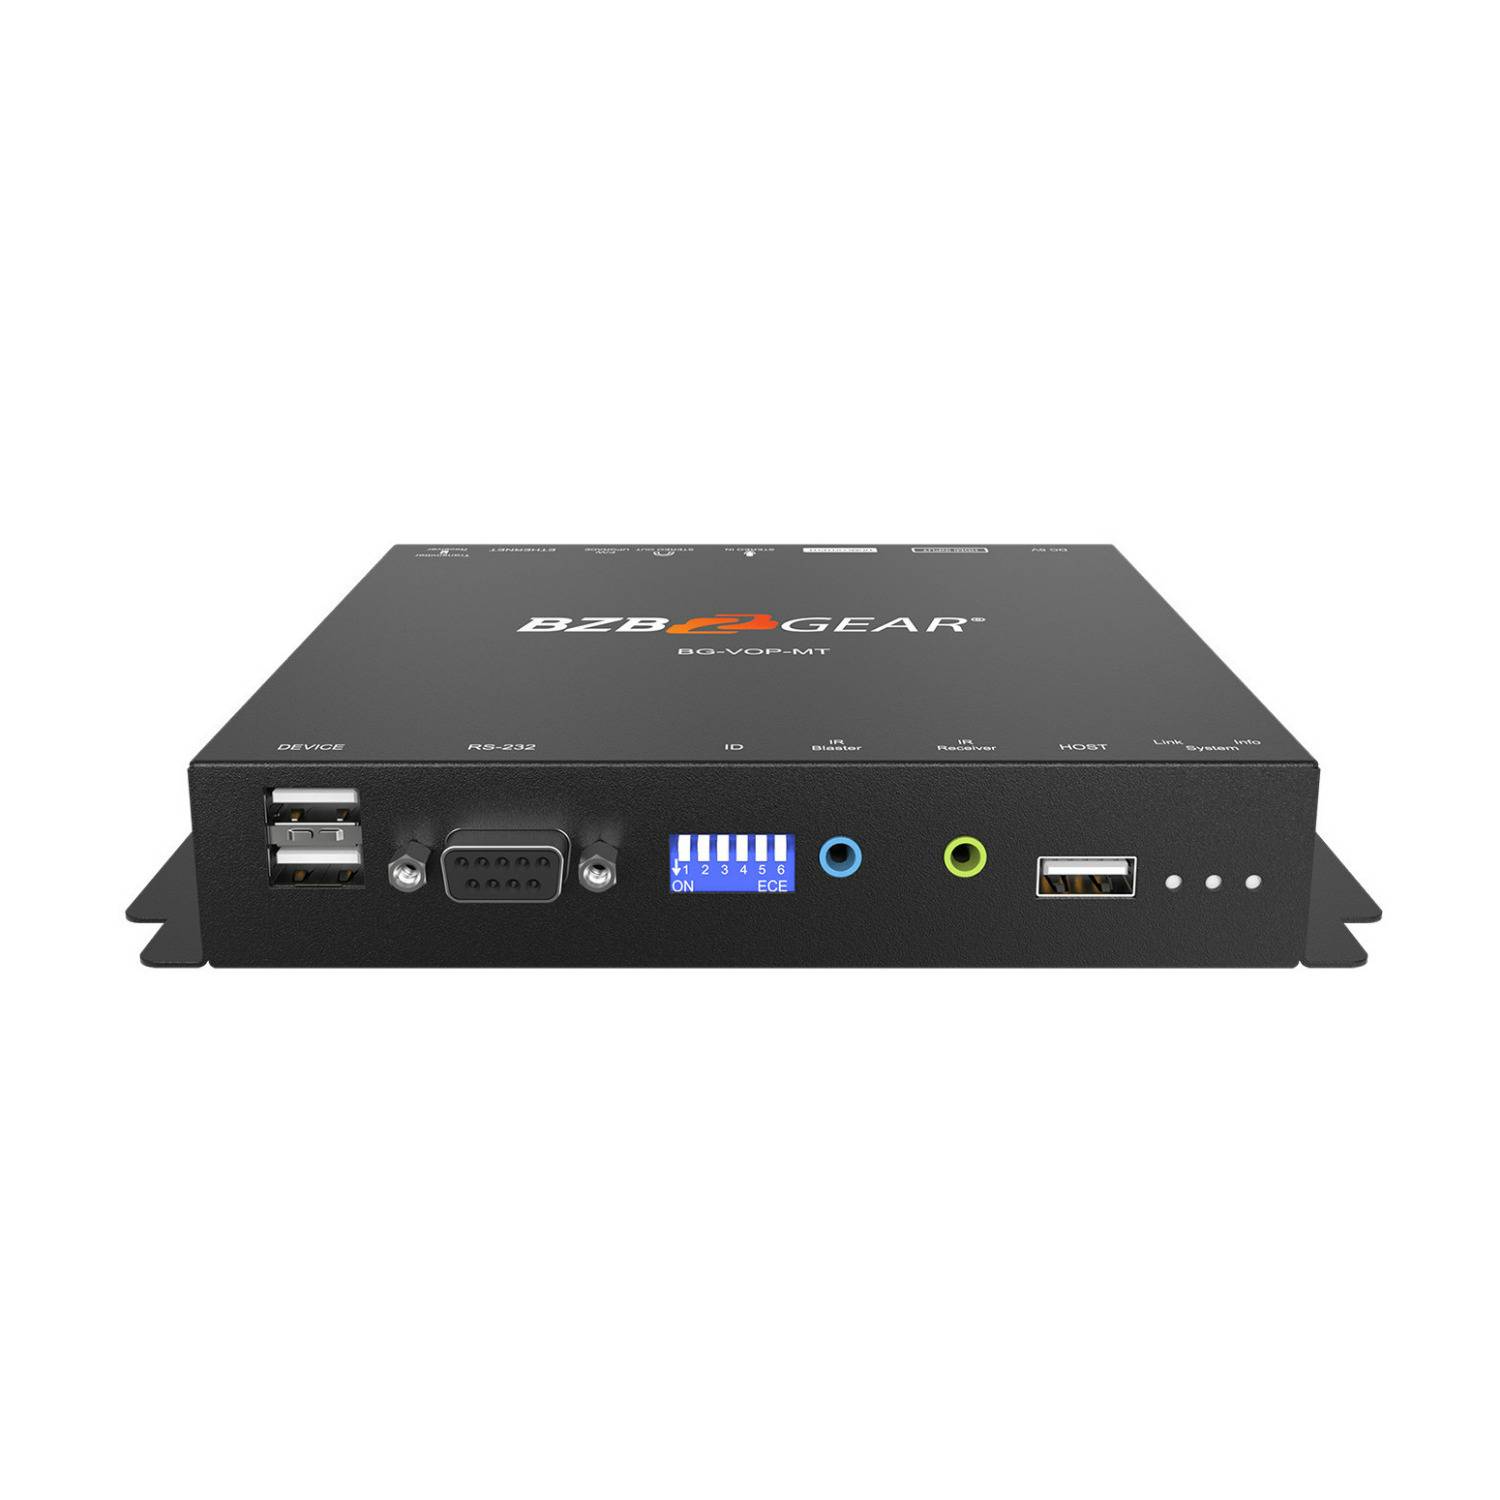 BZBGear 4K UHD HDMI 2.0 over IP Multicast Transceiver with Video Wall & PoE Support